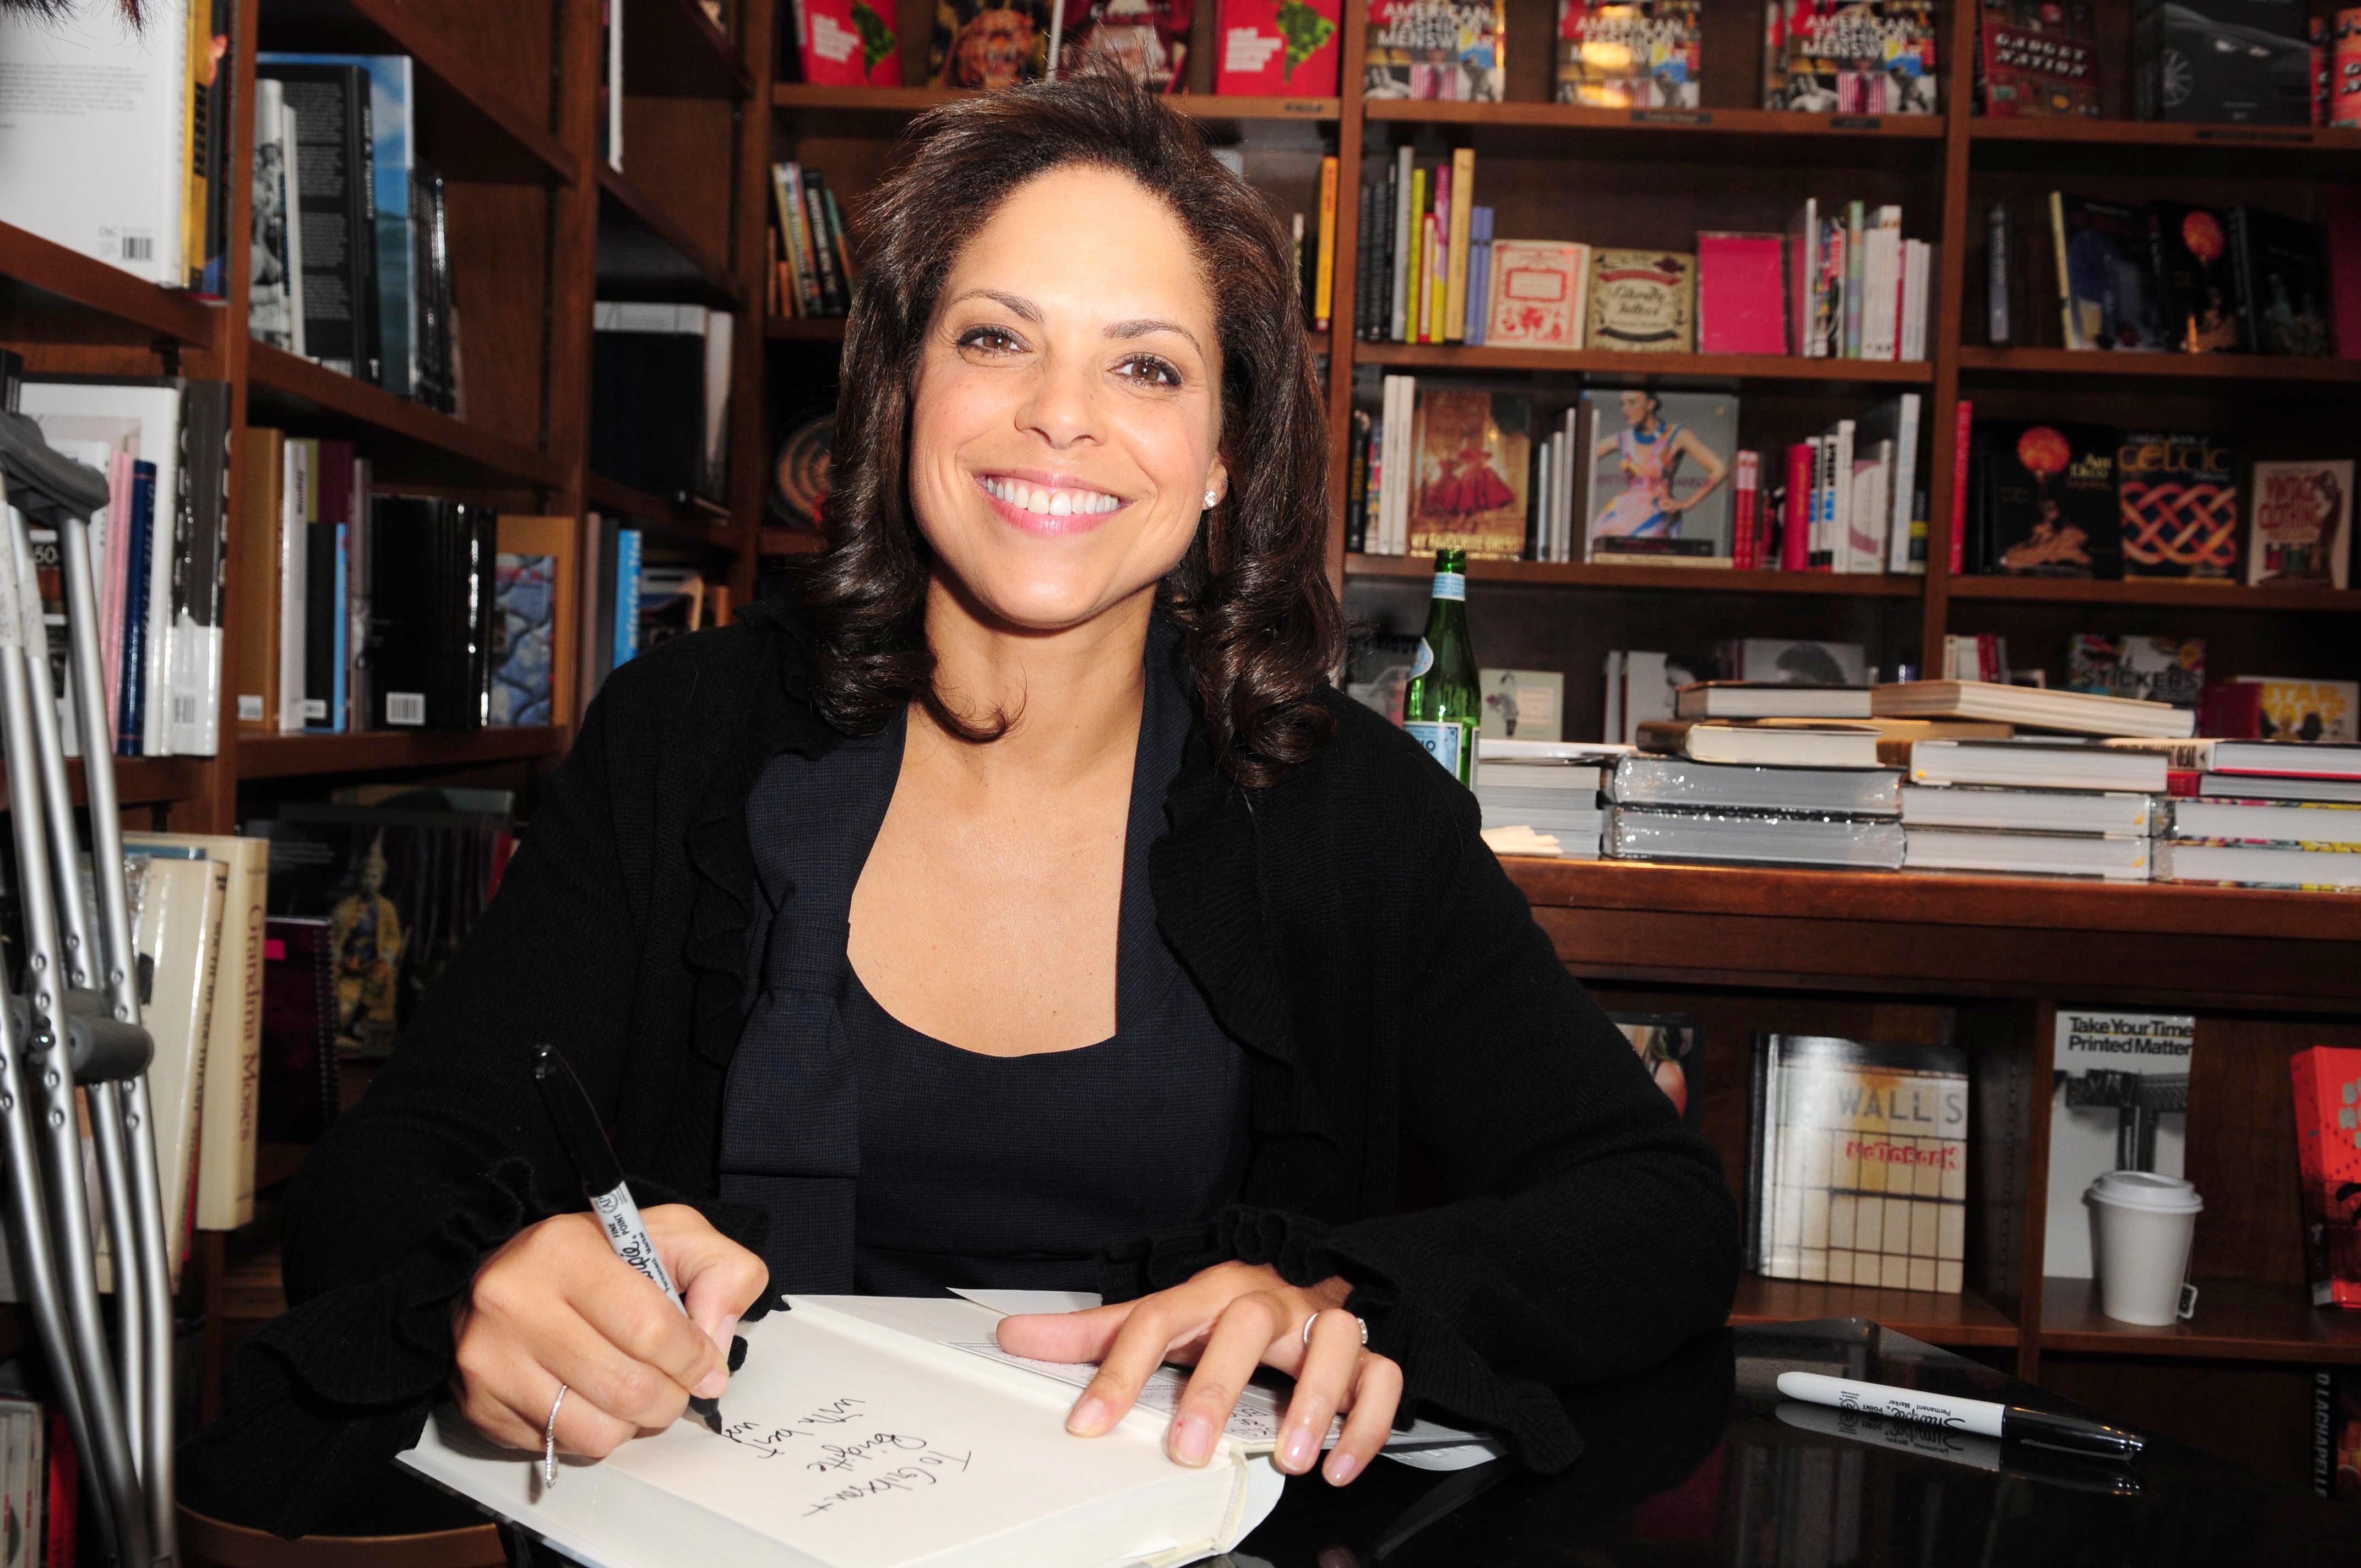 Soledad O'Brien Discussion and Book Signing at Books & Books